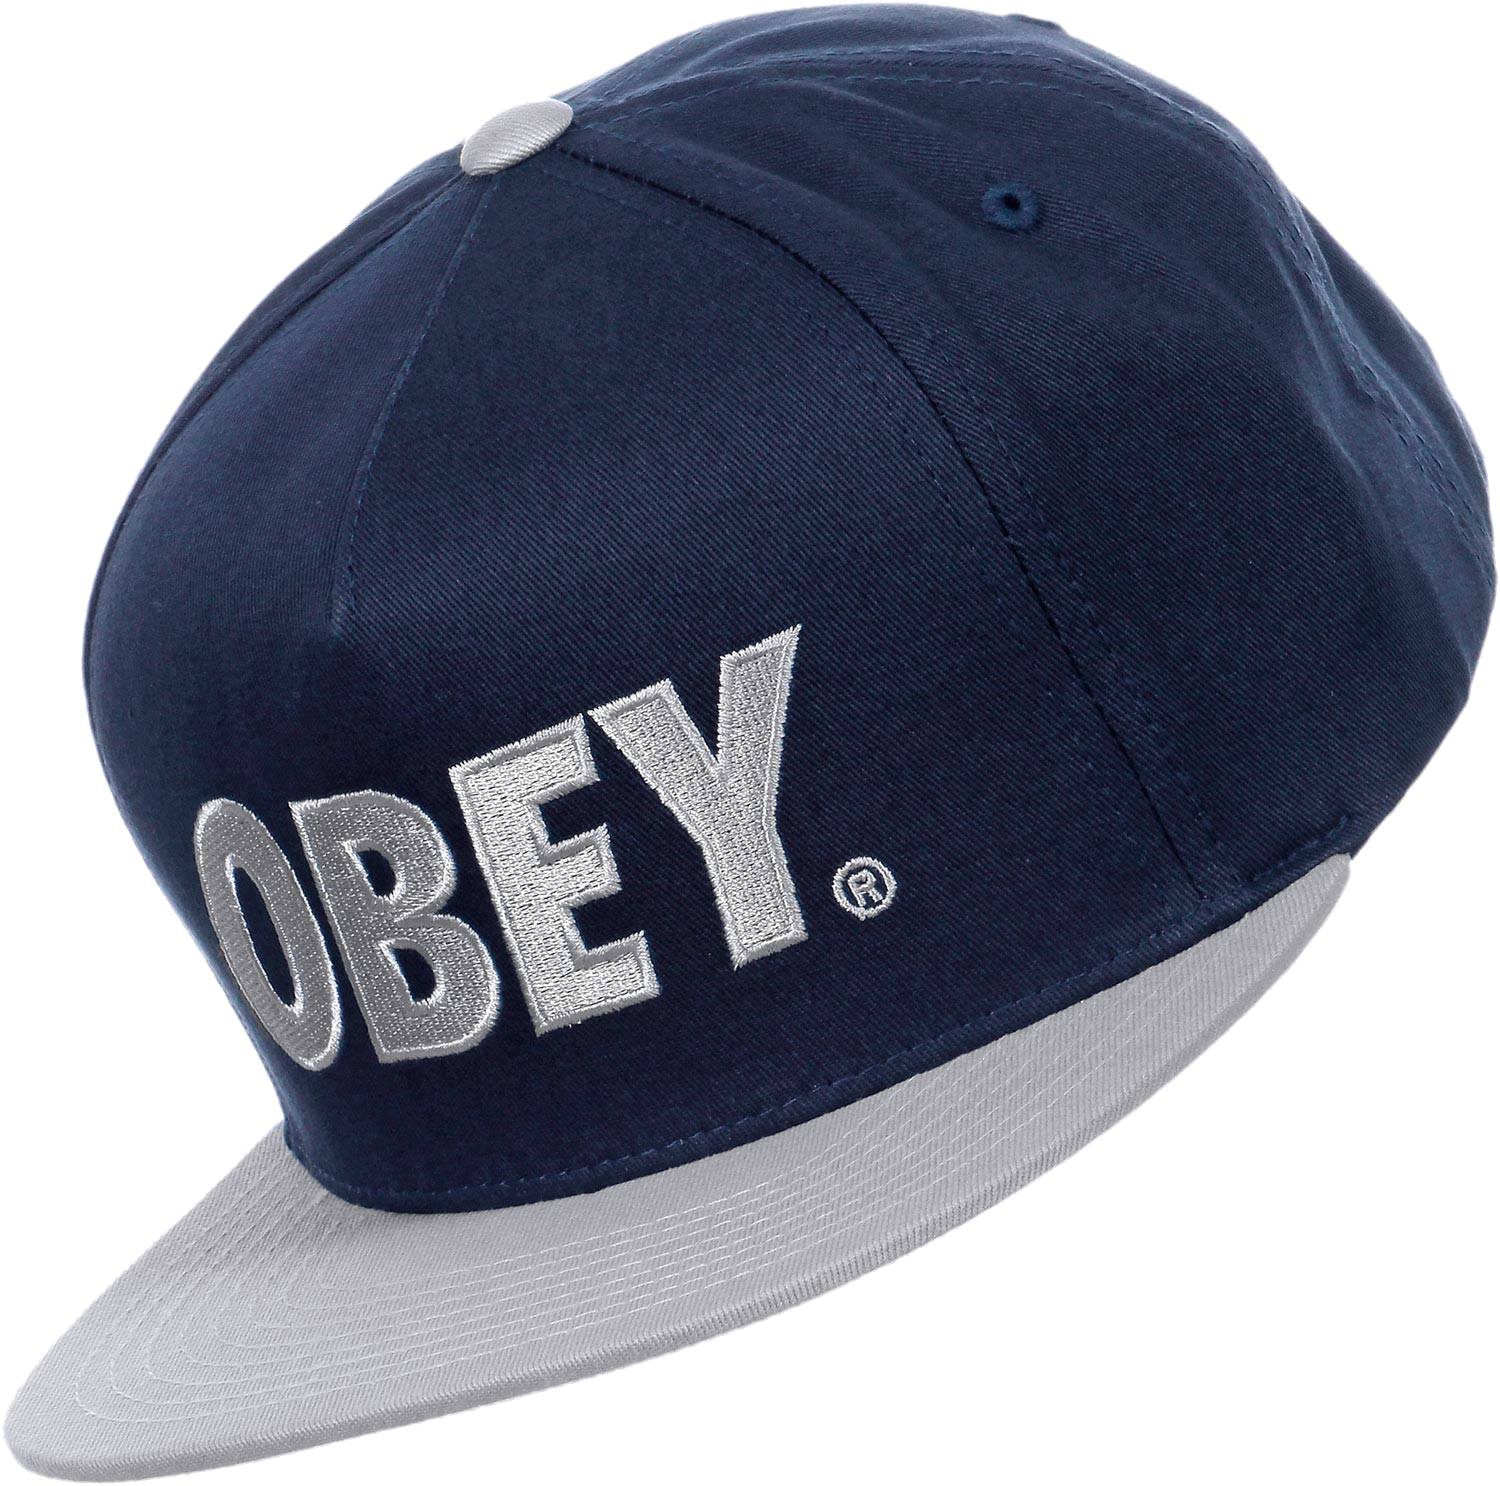 Obey Cap PNG Free Download